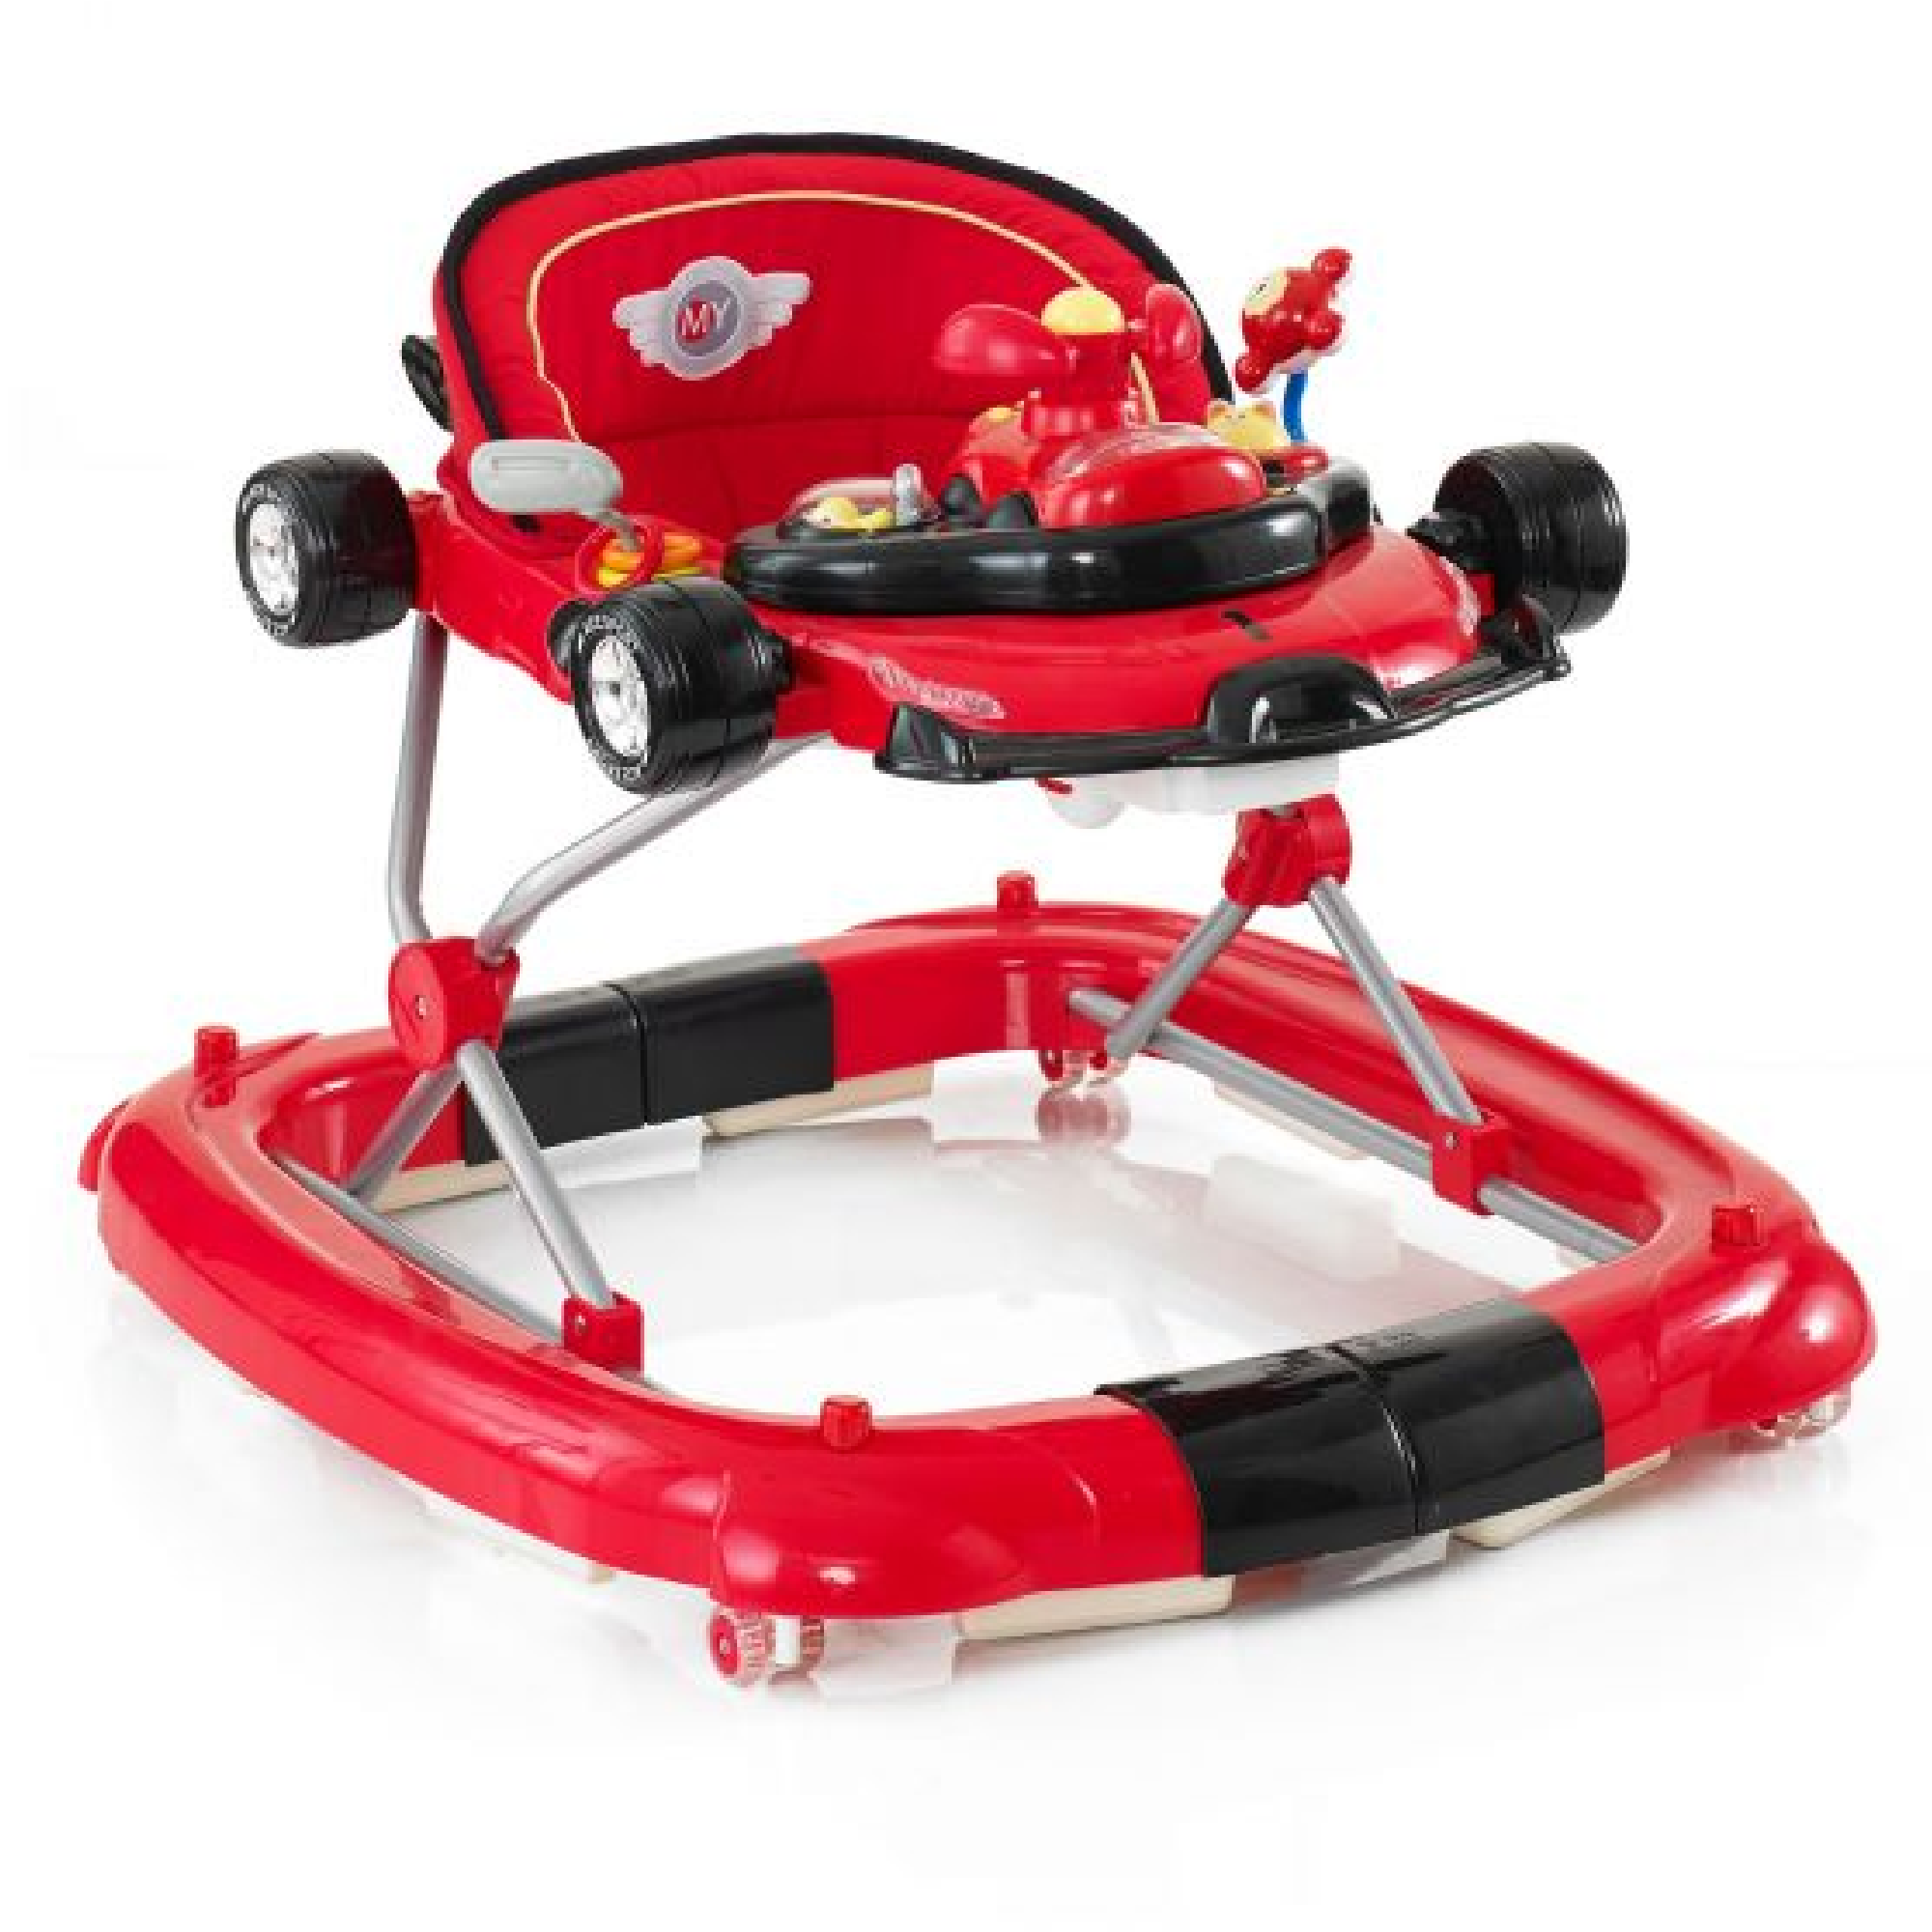 My Child F1 Car Walker - Racing Red 